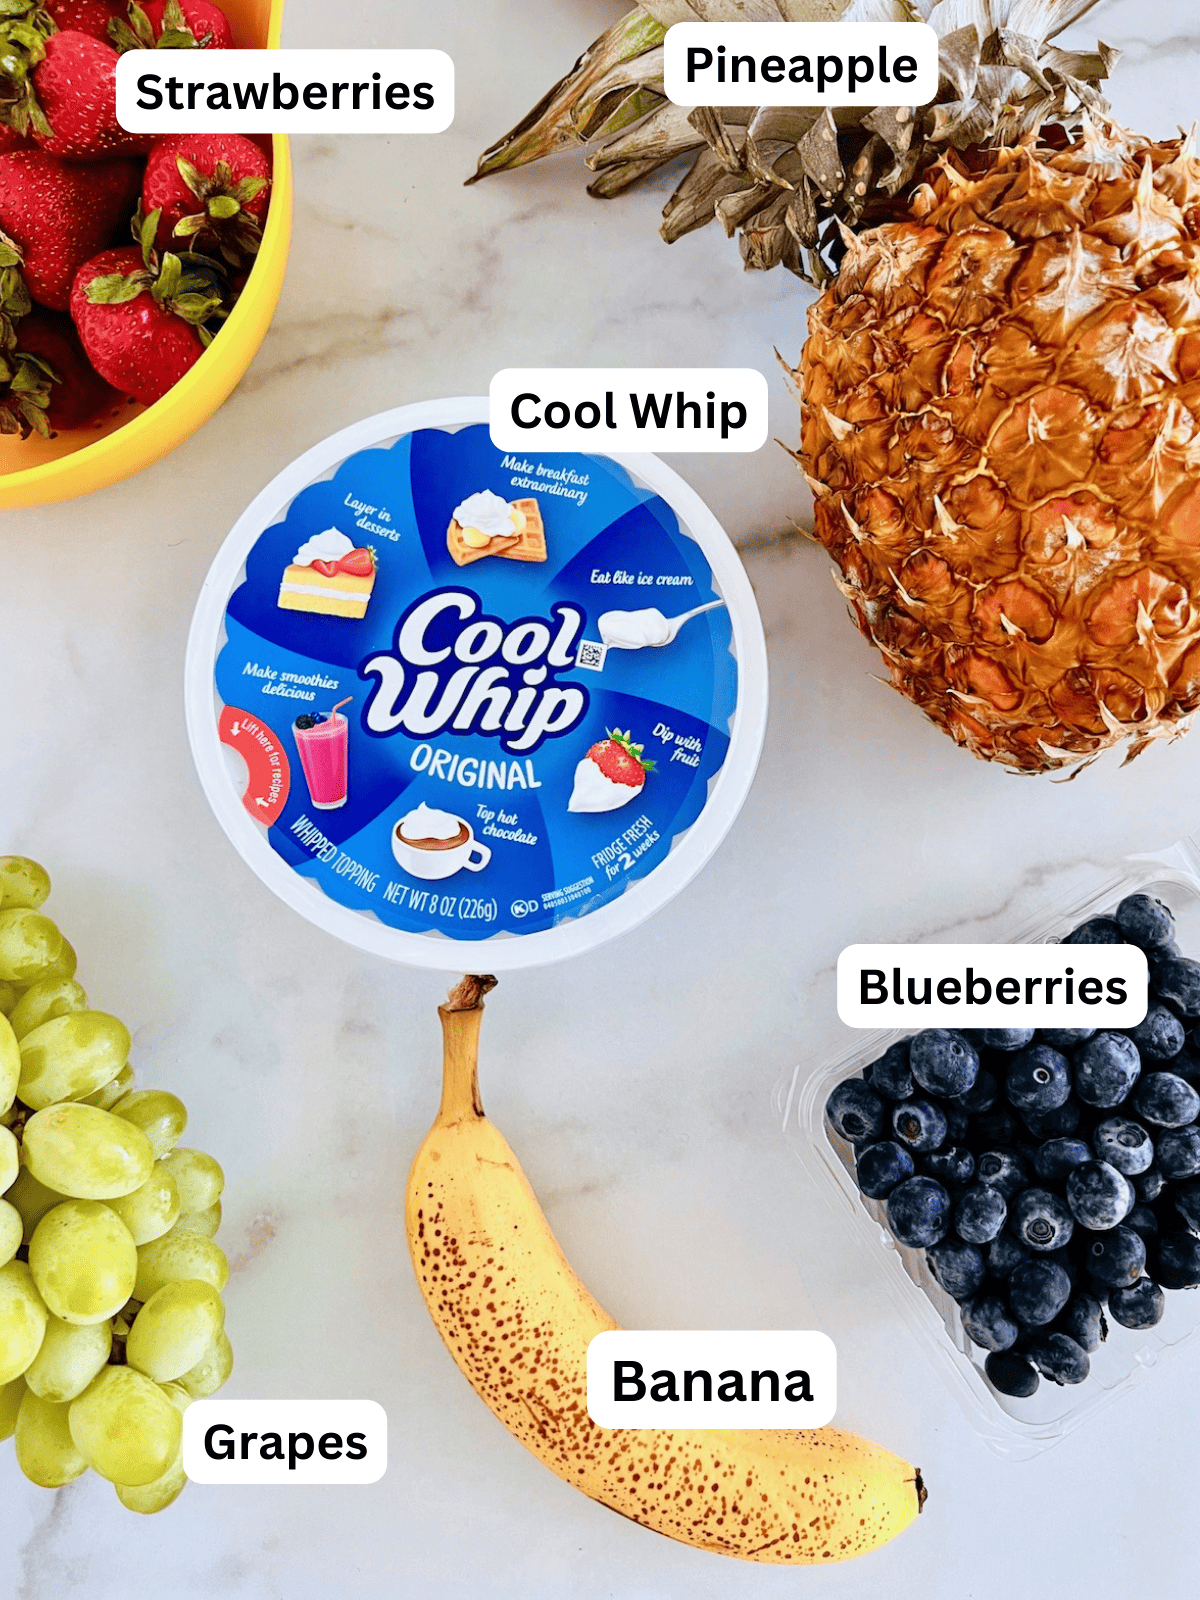 Fruit Salad with Cool Whip Ingredients Labeled.